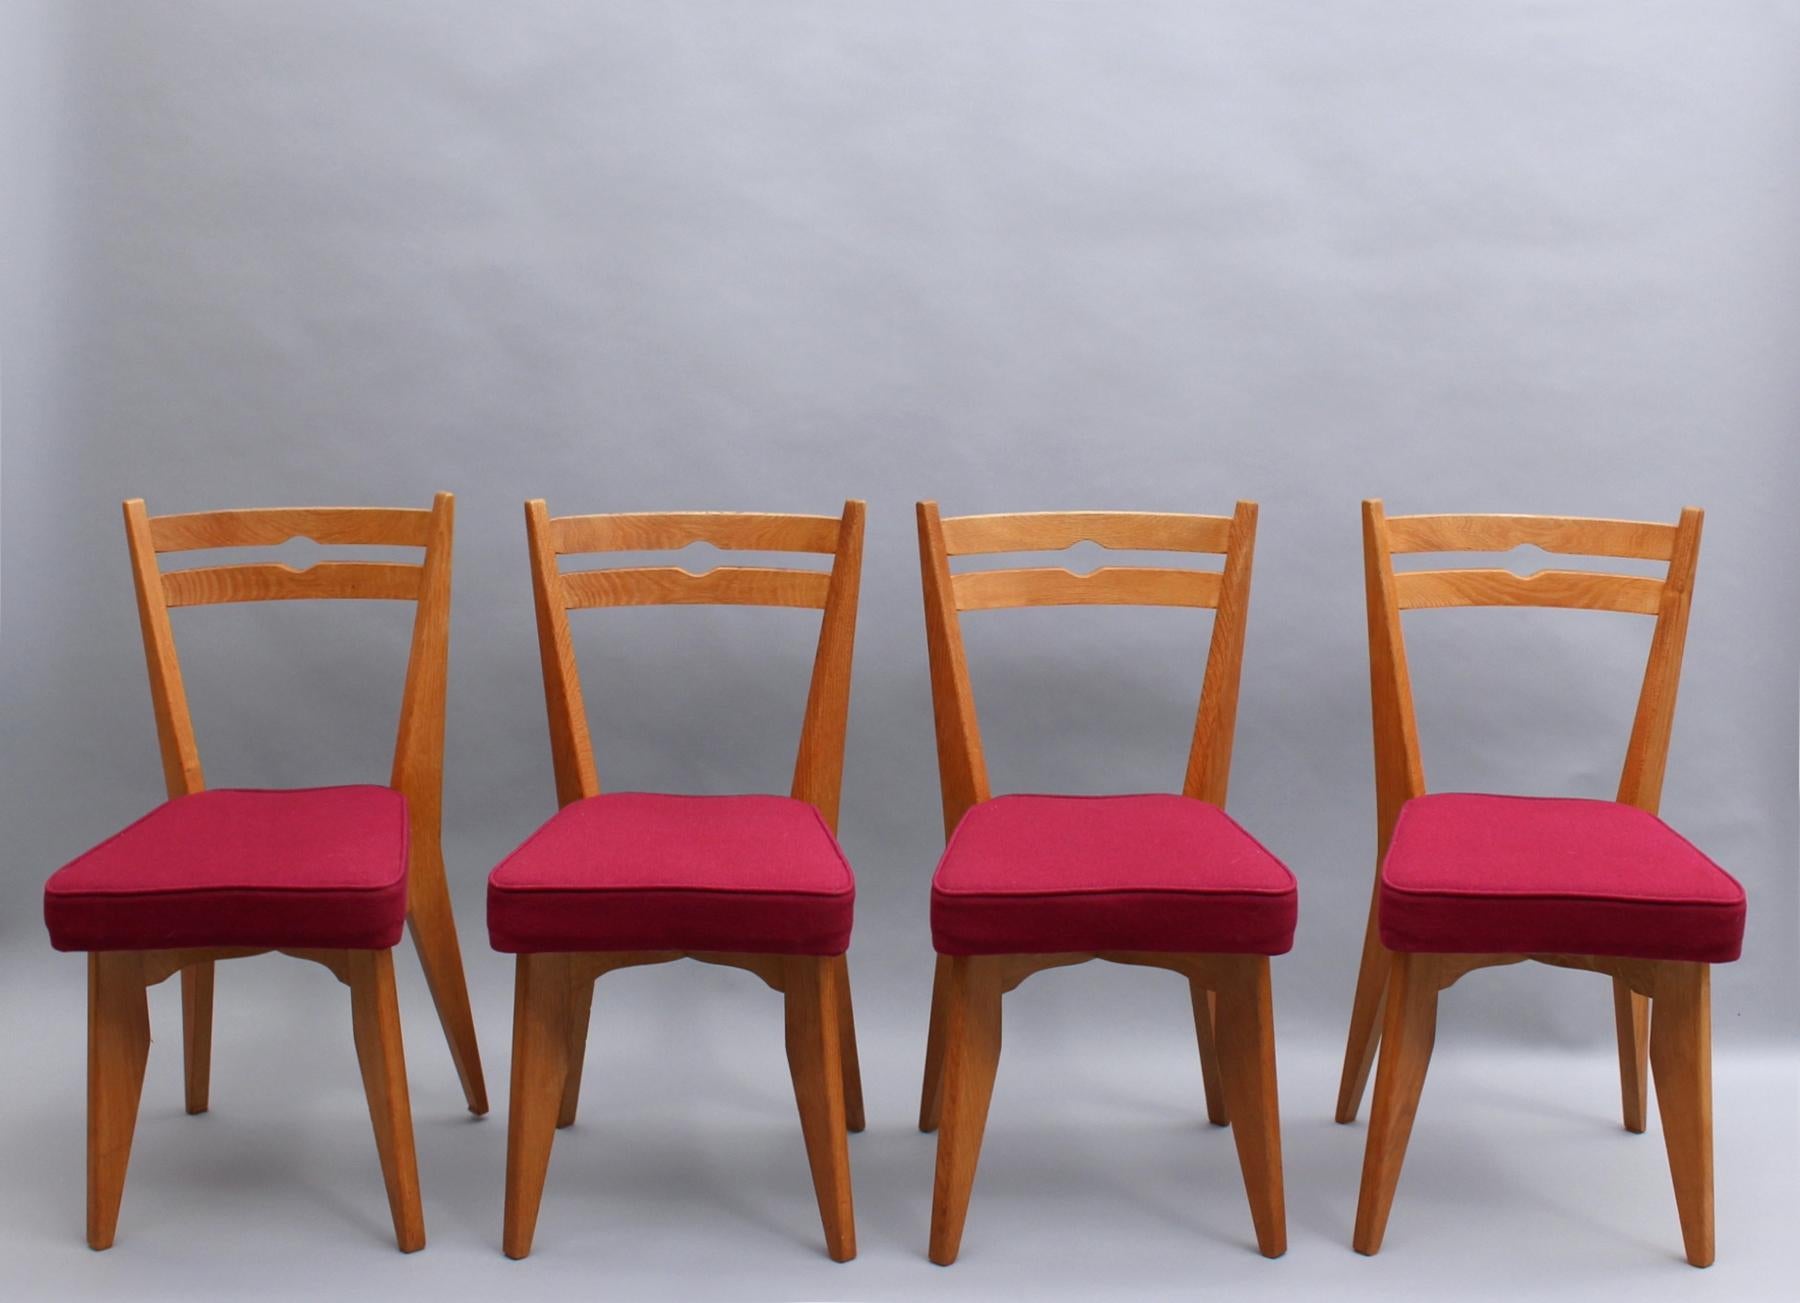 A set of four French mid-century solid oak dining chairs by Guillerme et Chambron for Votre Maison (editor).